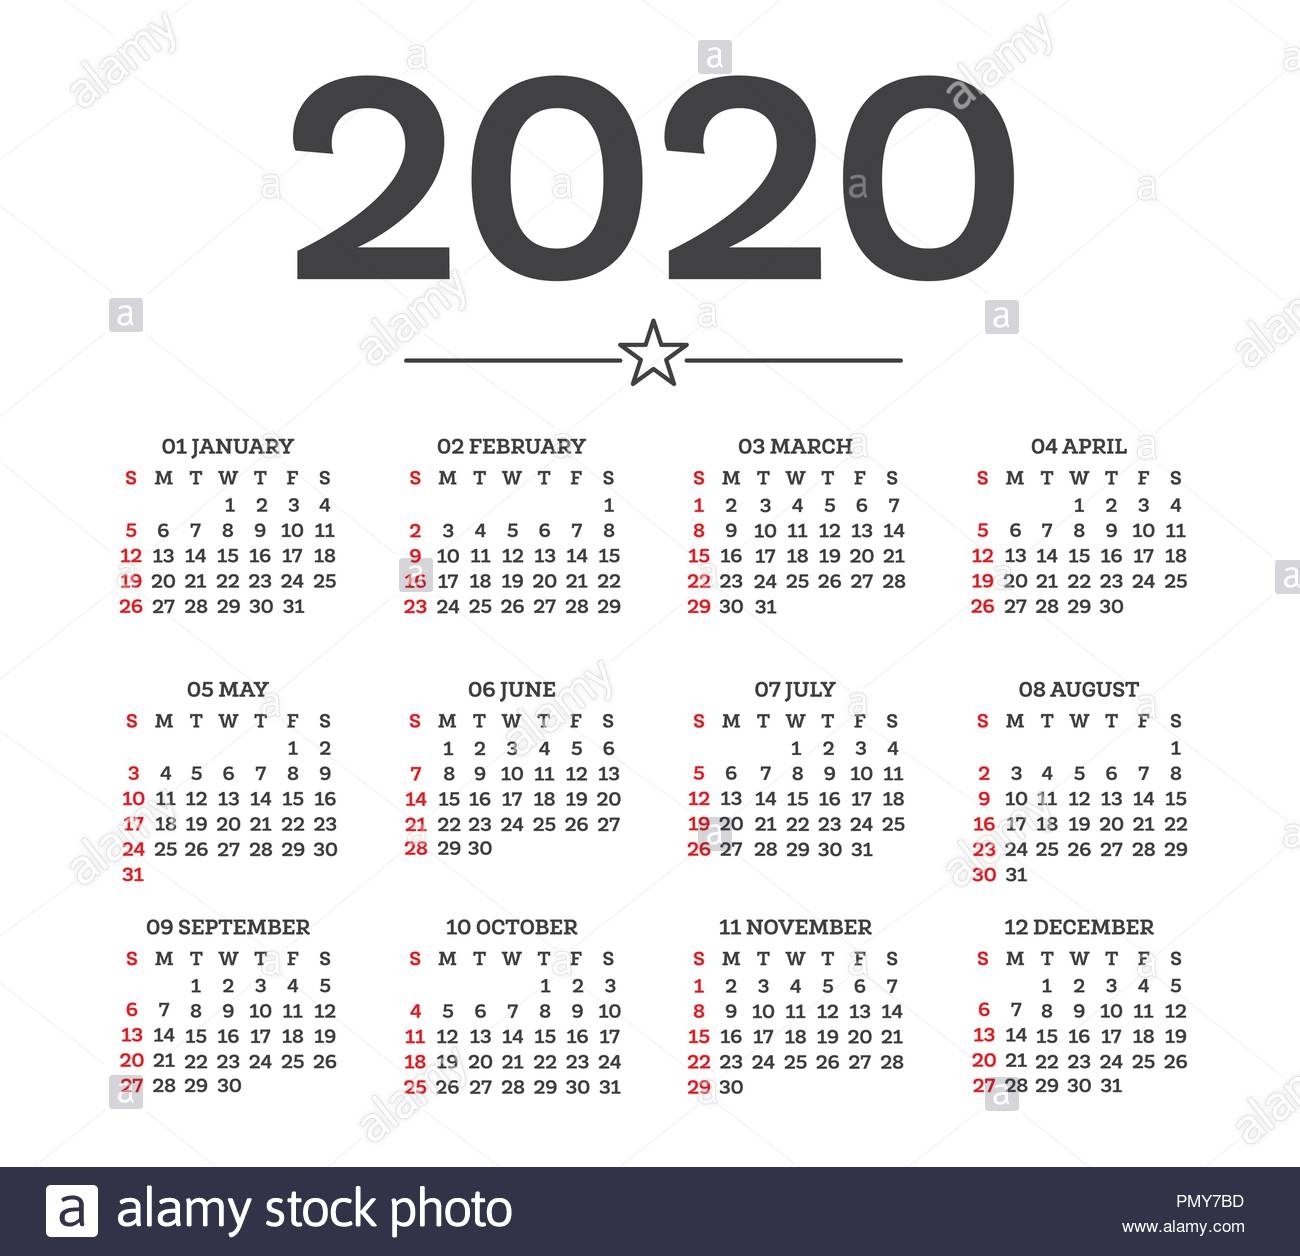 Calendar 2020 Isolated On White Background. Week Starts From